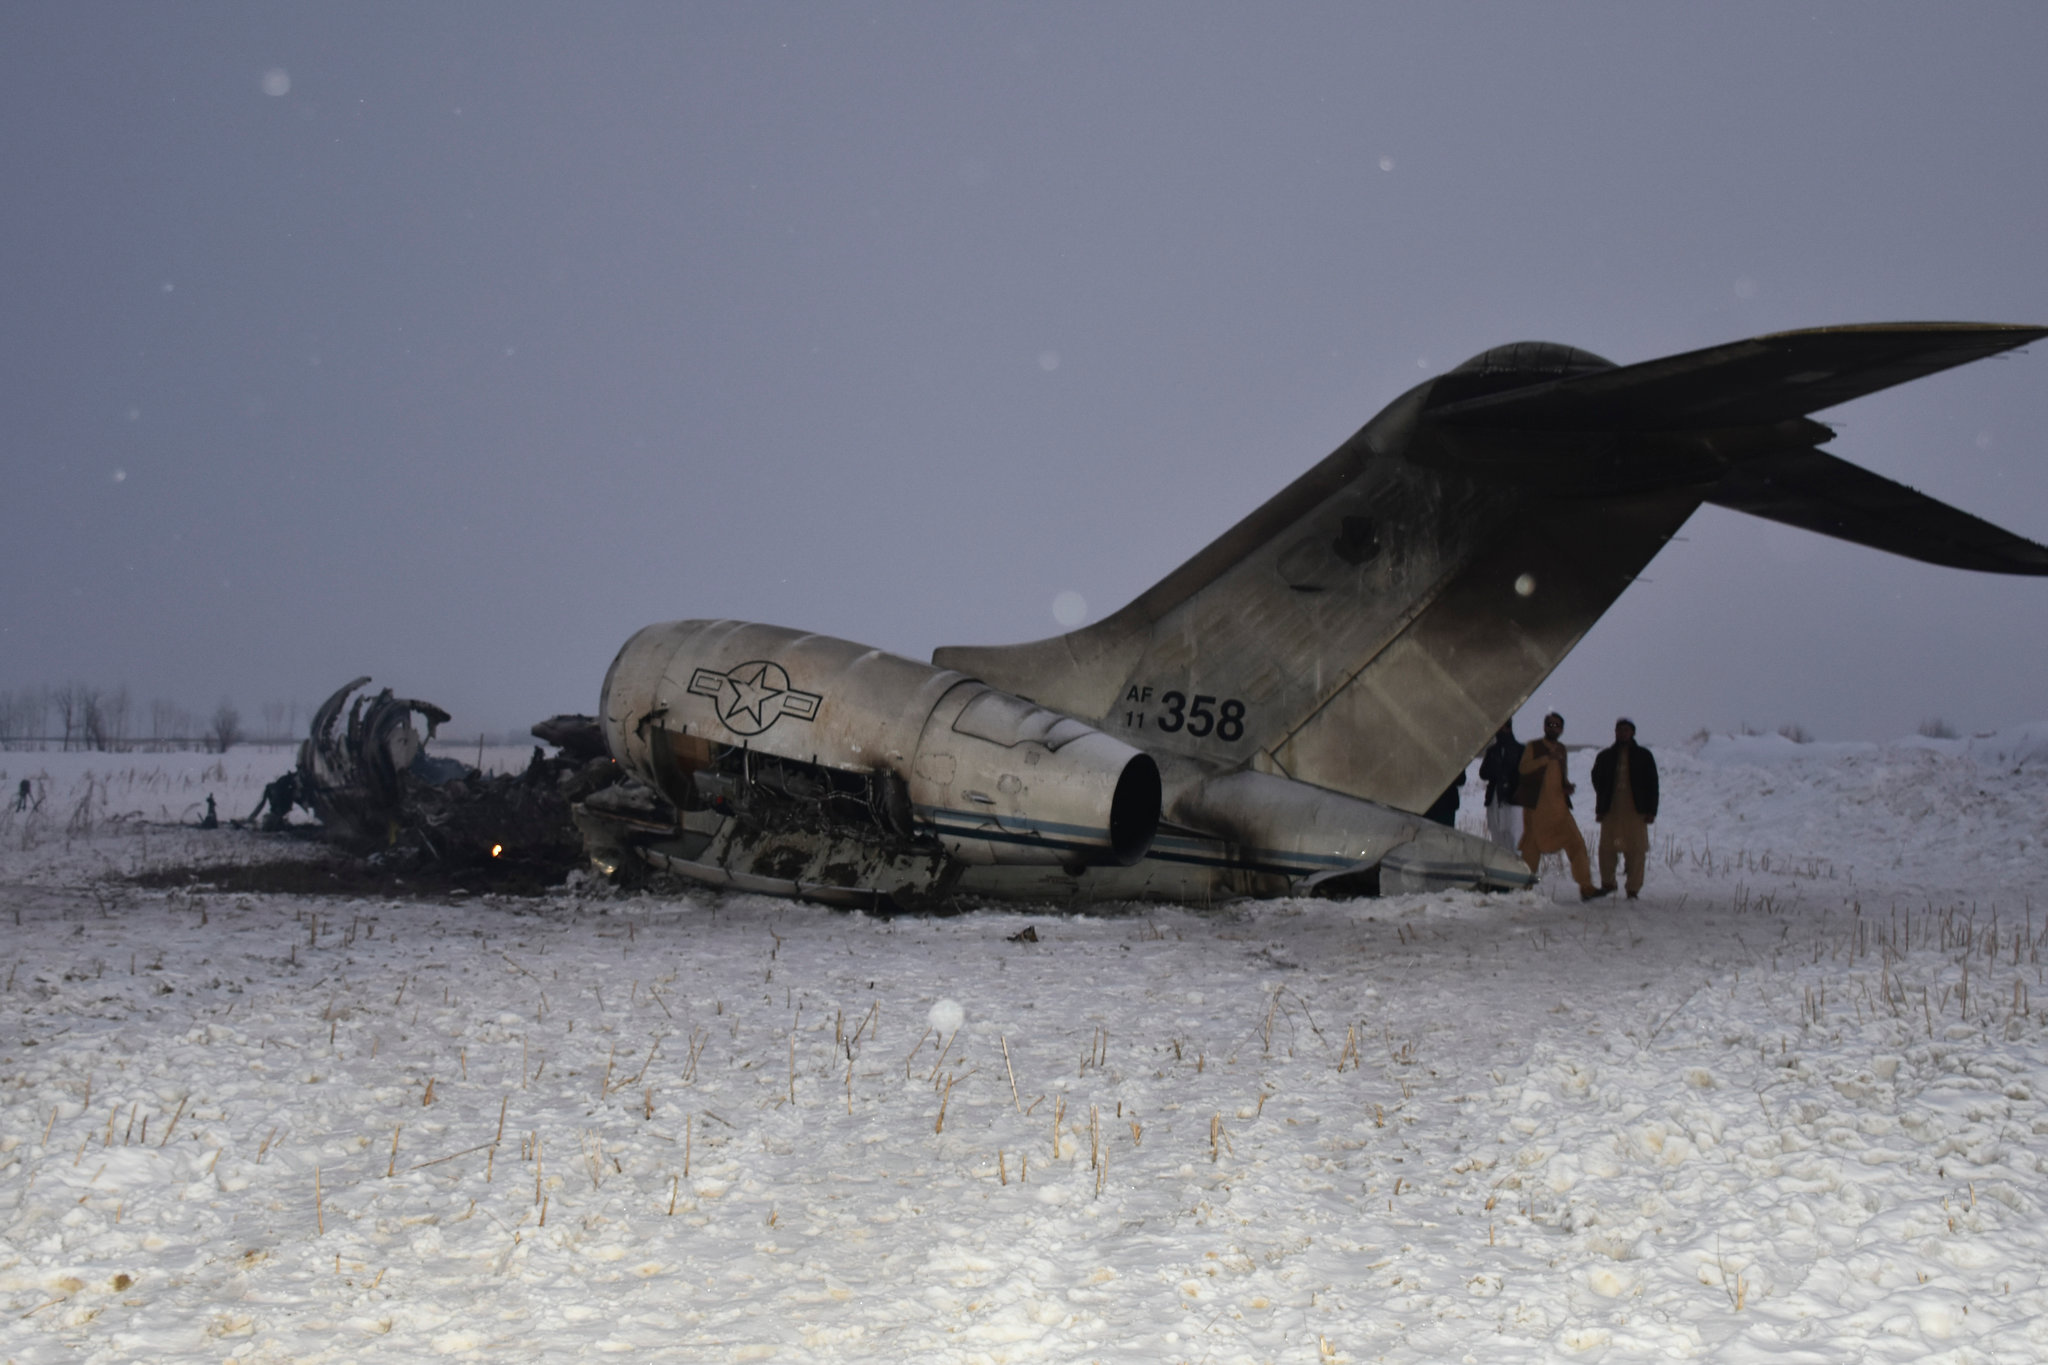 U.S. military plane belonging to Marine Corps aircraft crashes in Norway